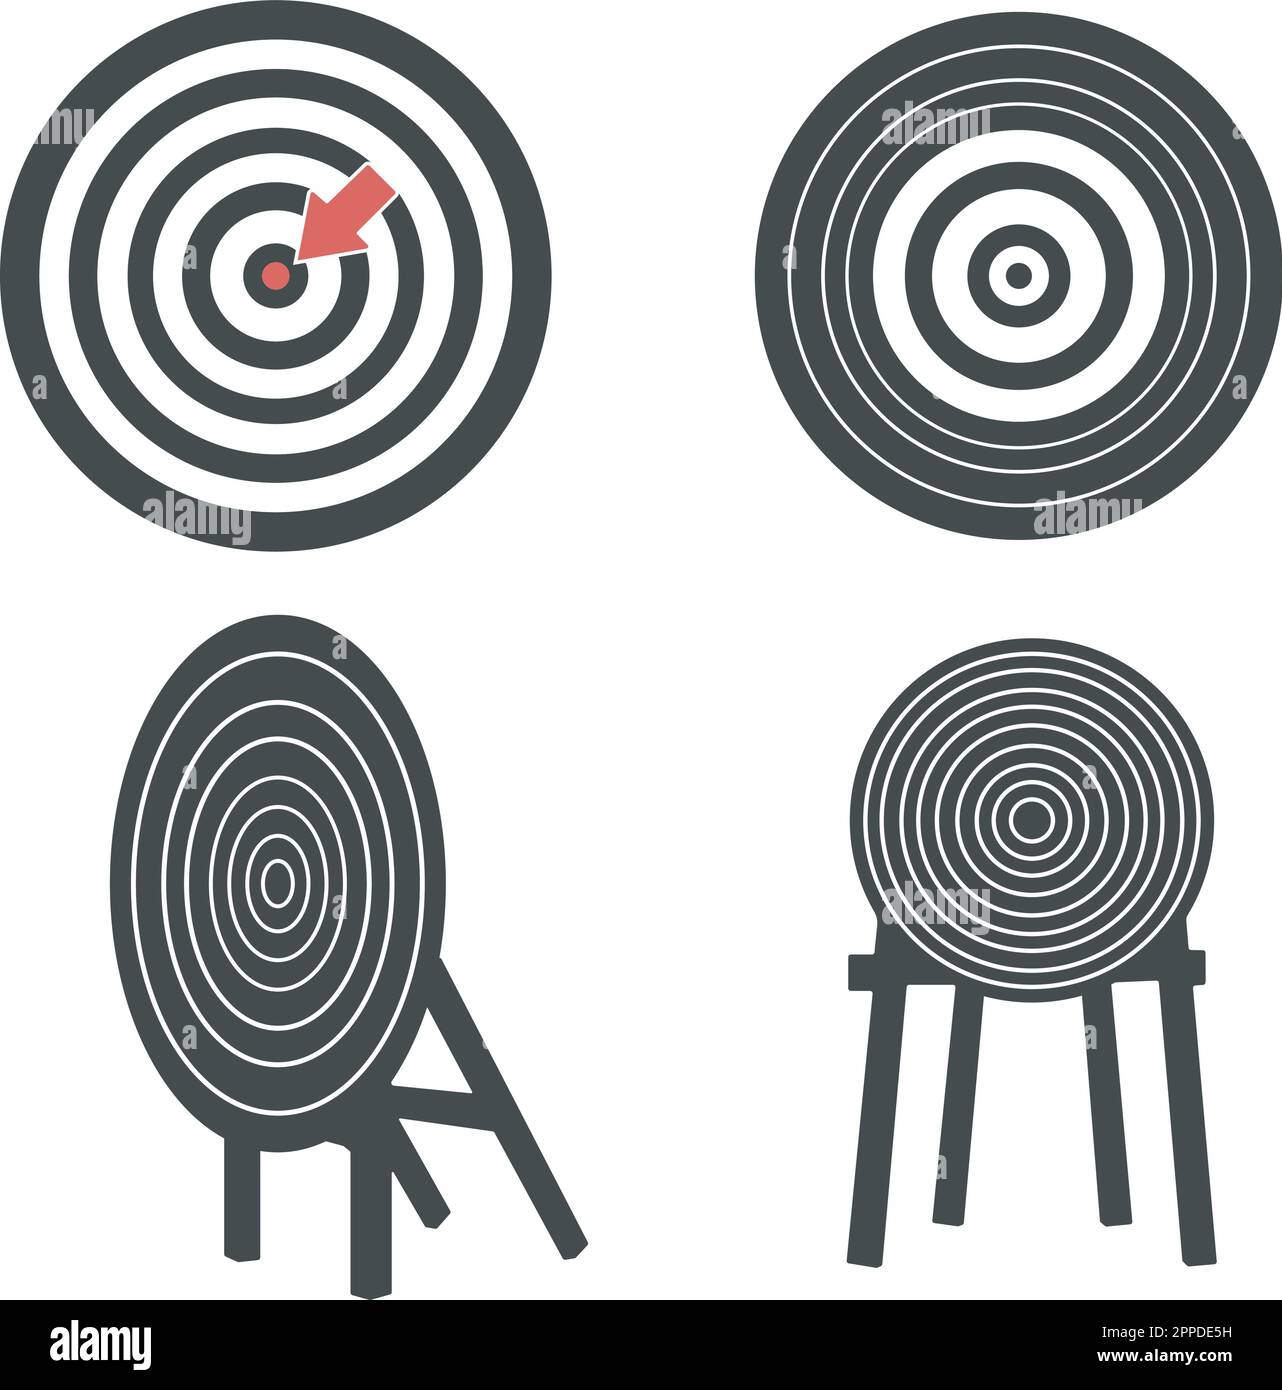 Archery target silhouette, Target silhouette, Archery bow, and arrow vector Stock Vector